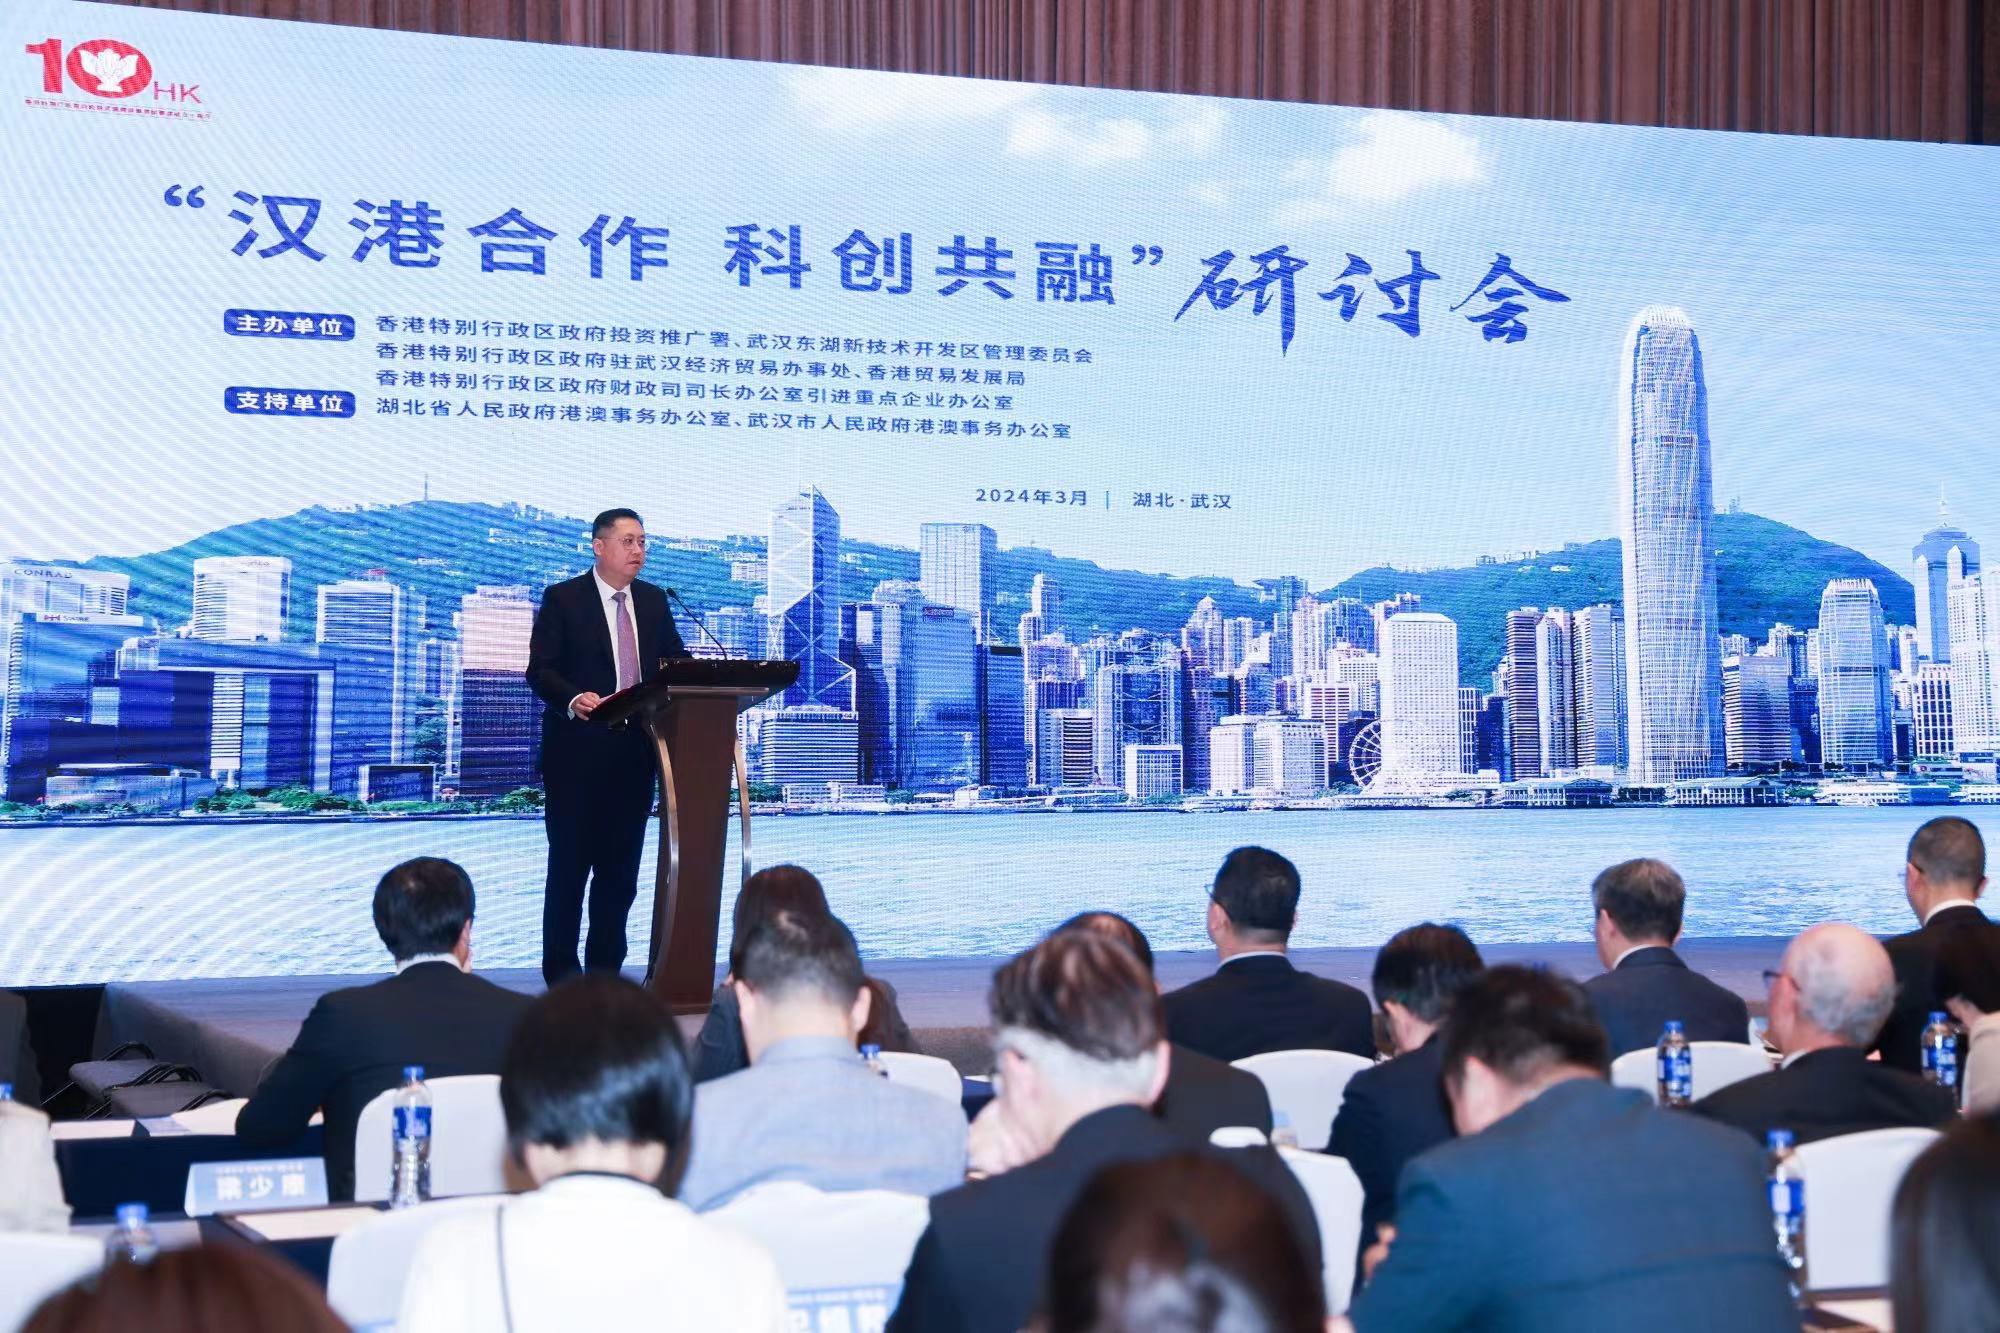 Invest Hong Kong and the Administrative Committee of Wuhan East Lake High-Tech Development Zone co-hosted a seminar in Wuhan, Hubei Province, today (March 21), encouraging local high-tech enterprises to make full use of Hong Kong's business advantages and opportunities in innovation development amid the Belt and Road Initiative and the Guangdong-Hong Kong-Macao Greater Bay Area development to expand overseas. Photo shows the Director of the Hong Kong Economic and Trade Office in Wuhan of the Government of the Hong Kong Special Administrative Region, Mr Franco Kwok, delivering remarks at the seminar. 


